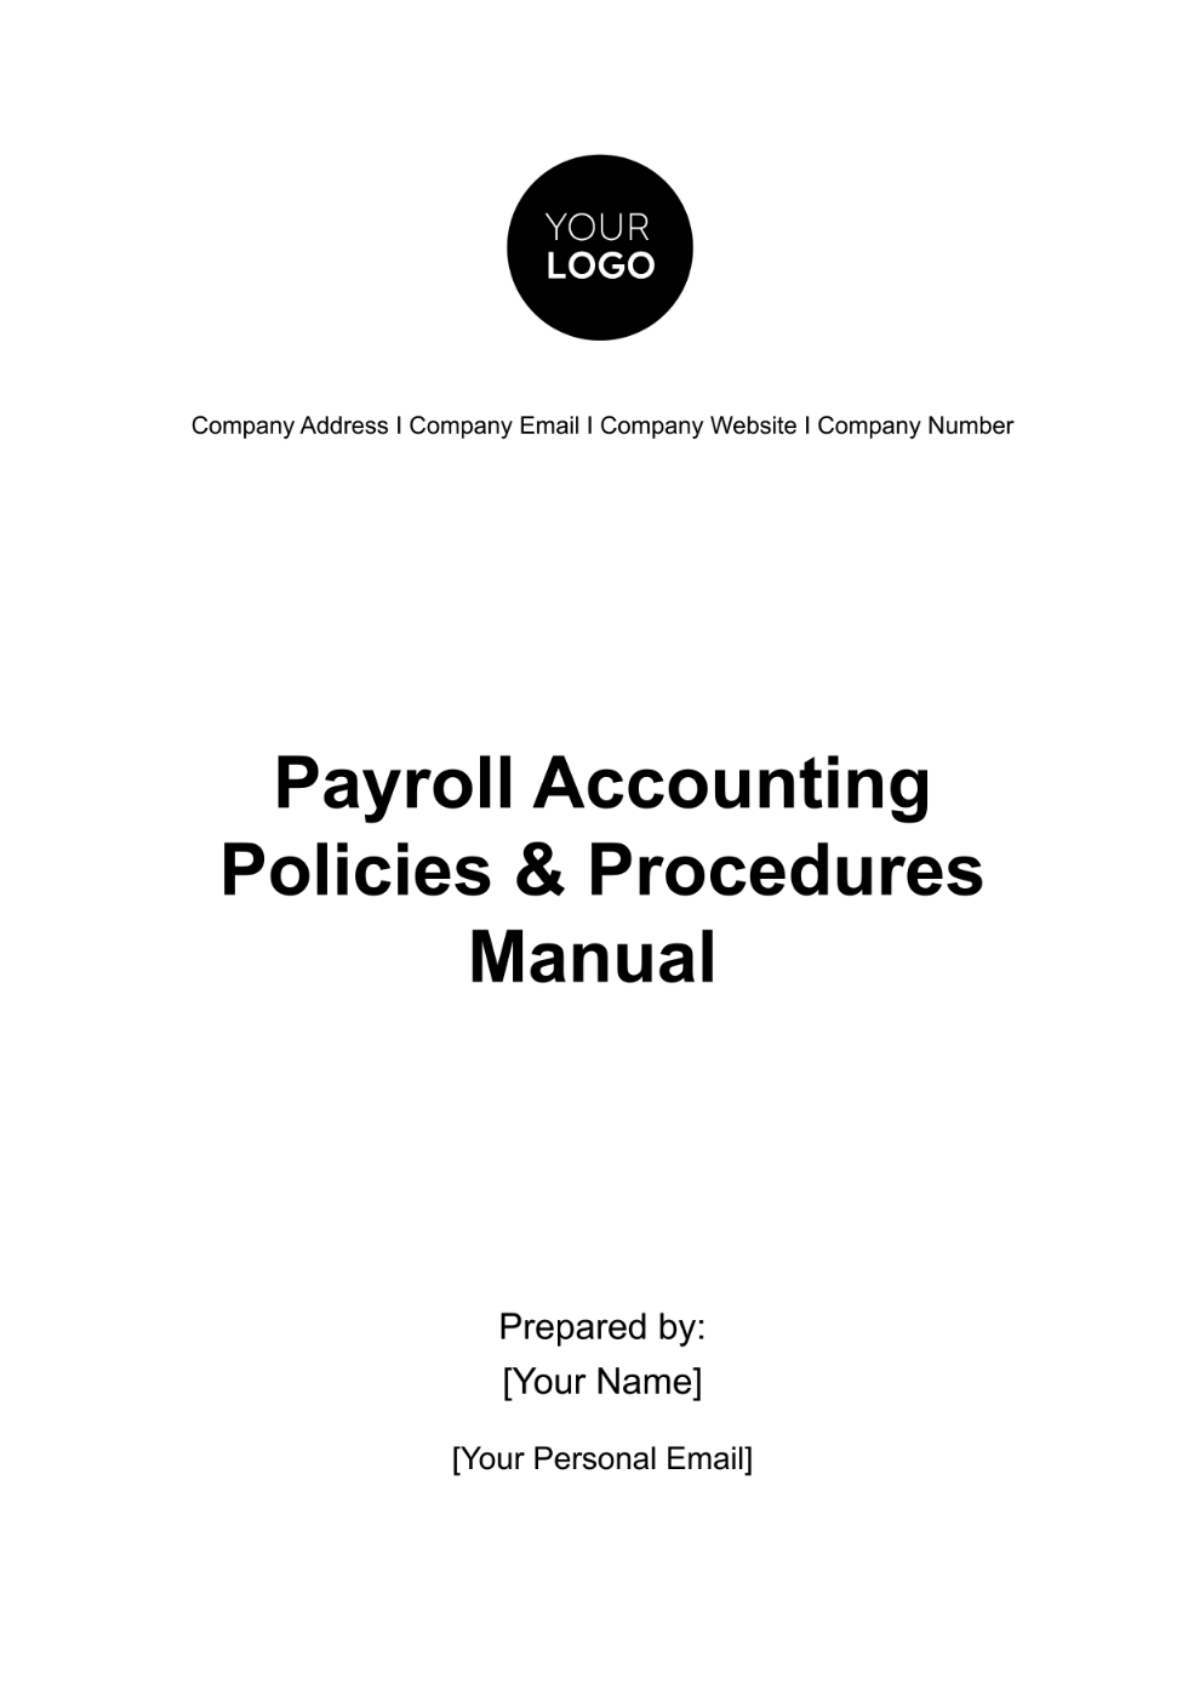 Payroll Accounting Policies & Procedures Manual Template